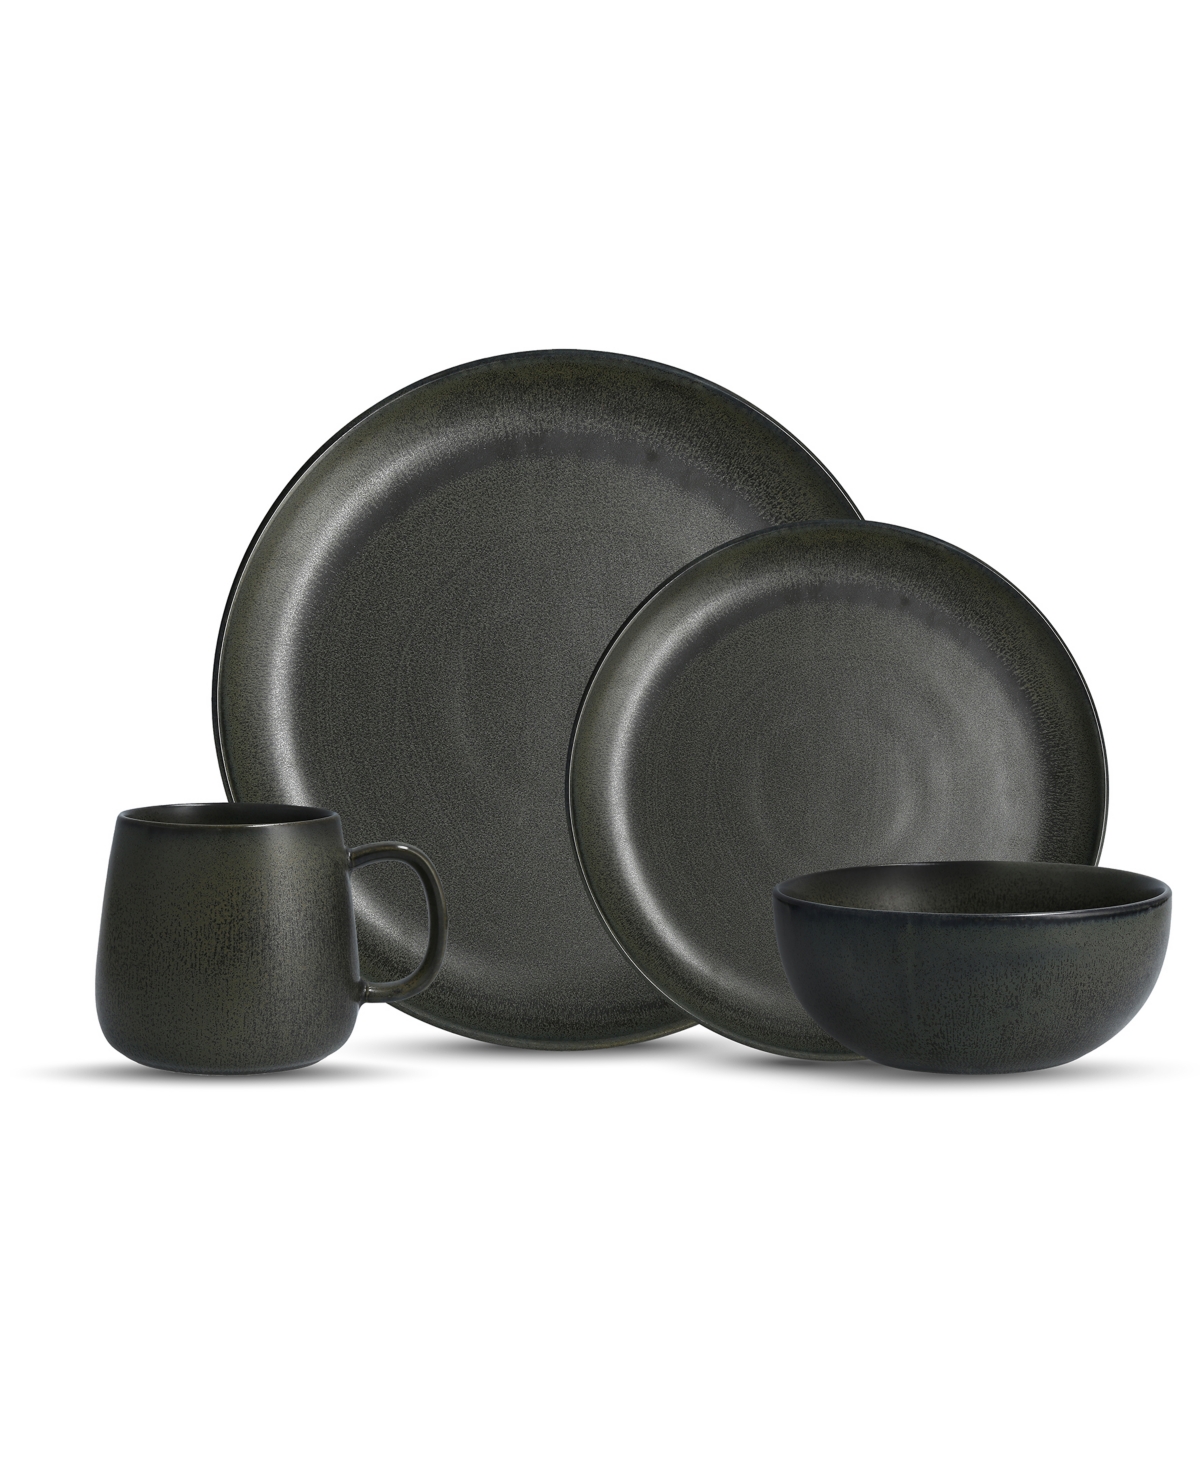 Sound Forest 16 Pc. Dinnerware Set, Service for 4 - Forest